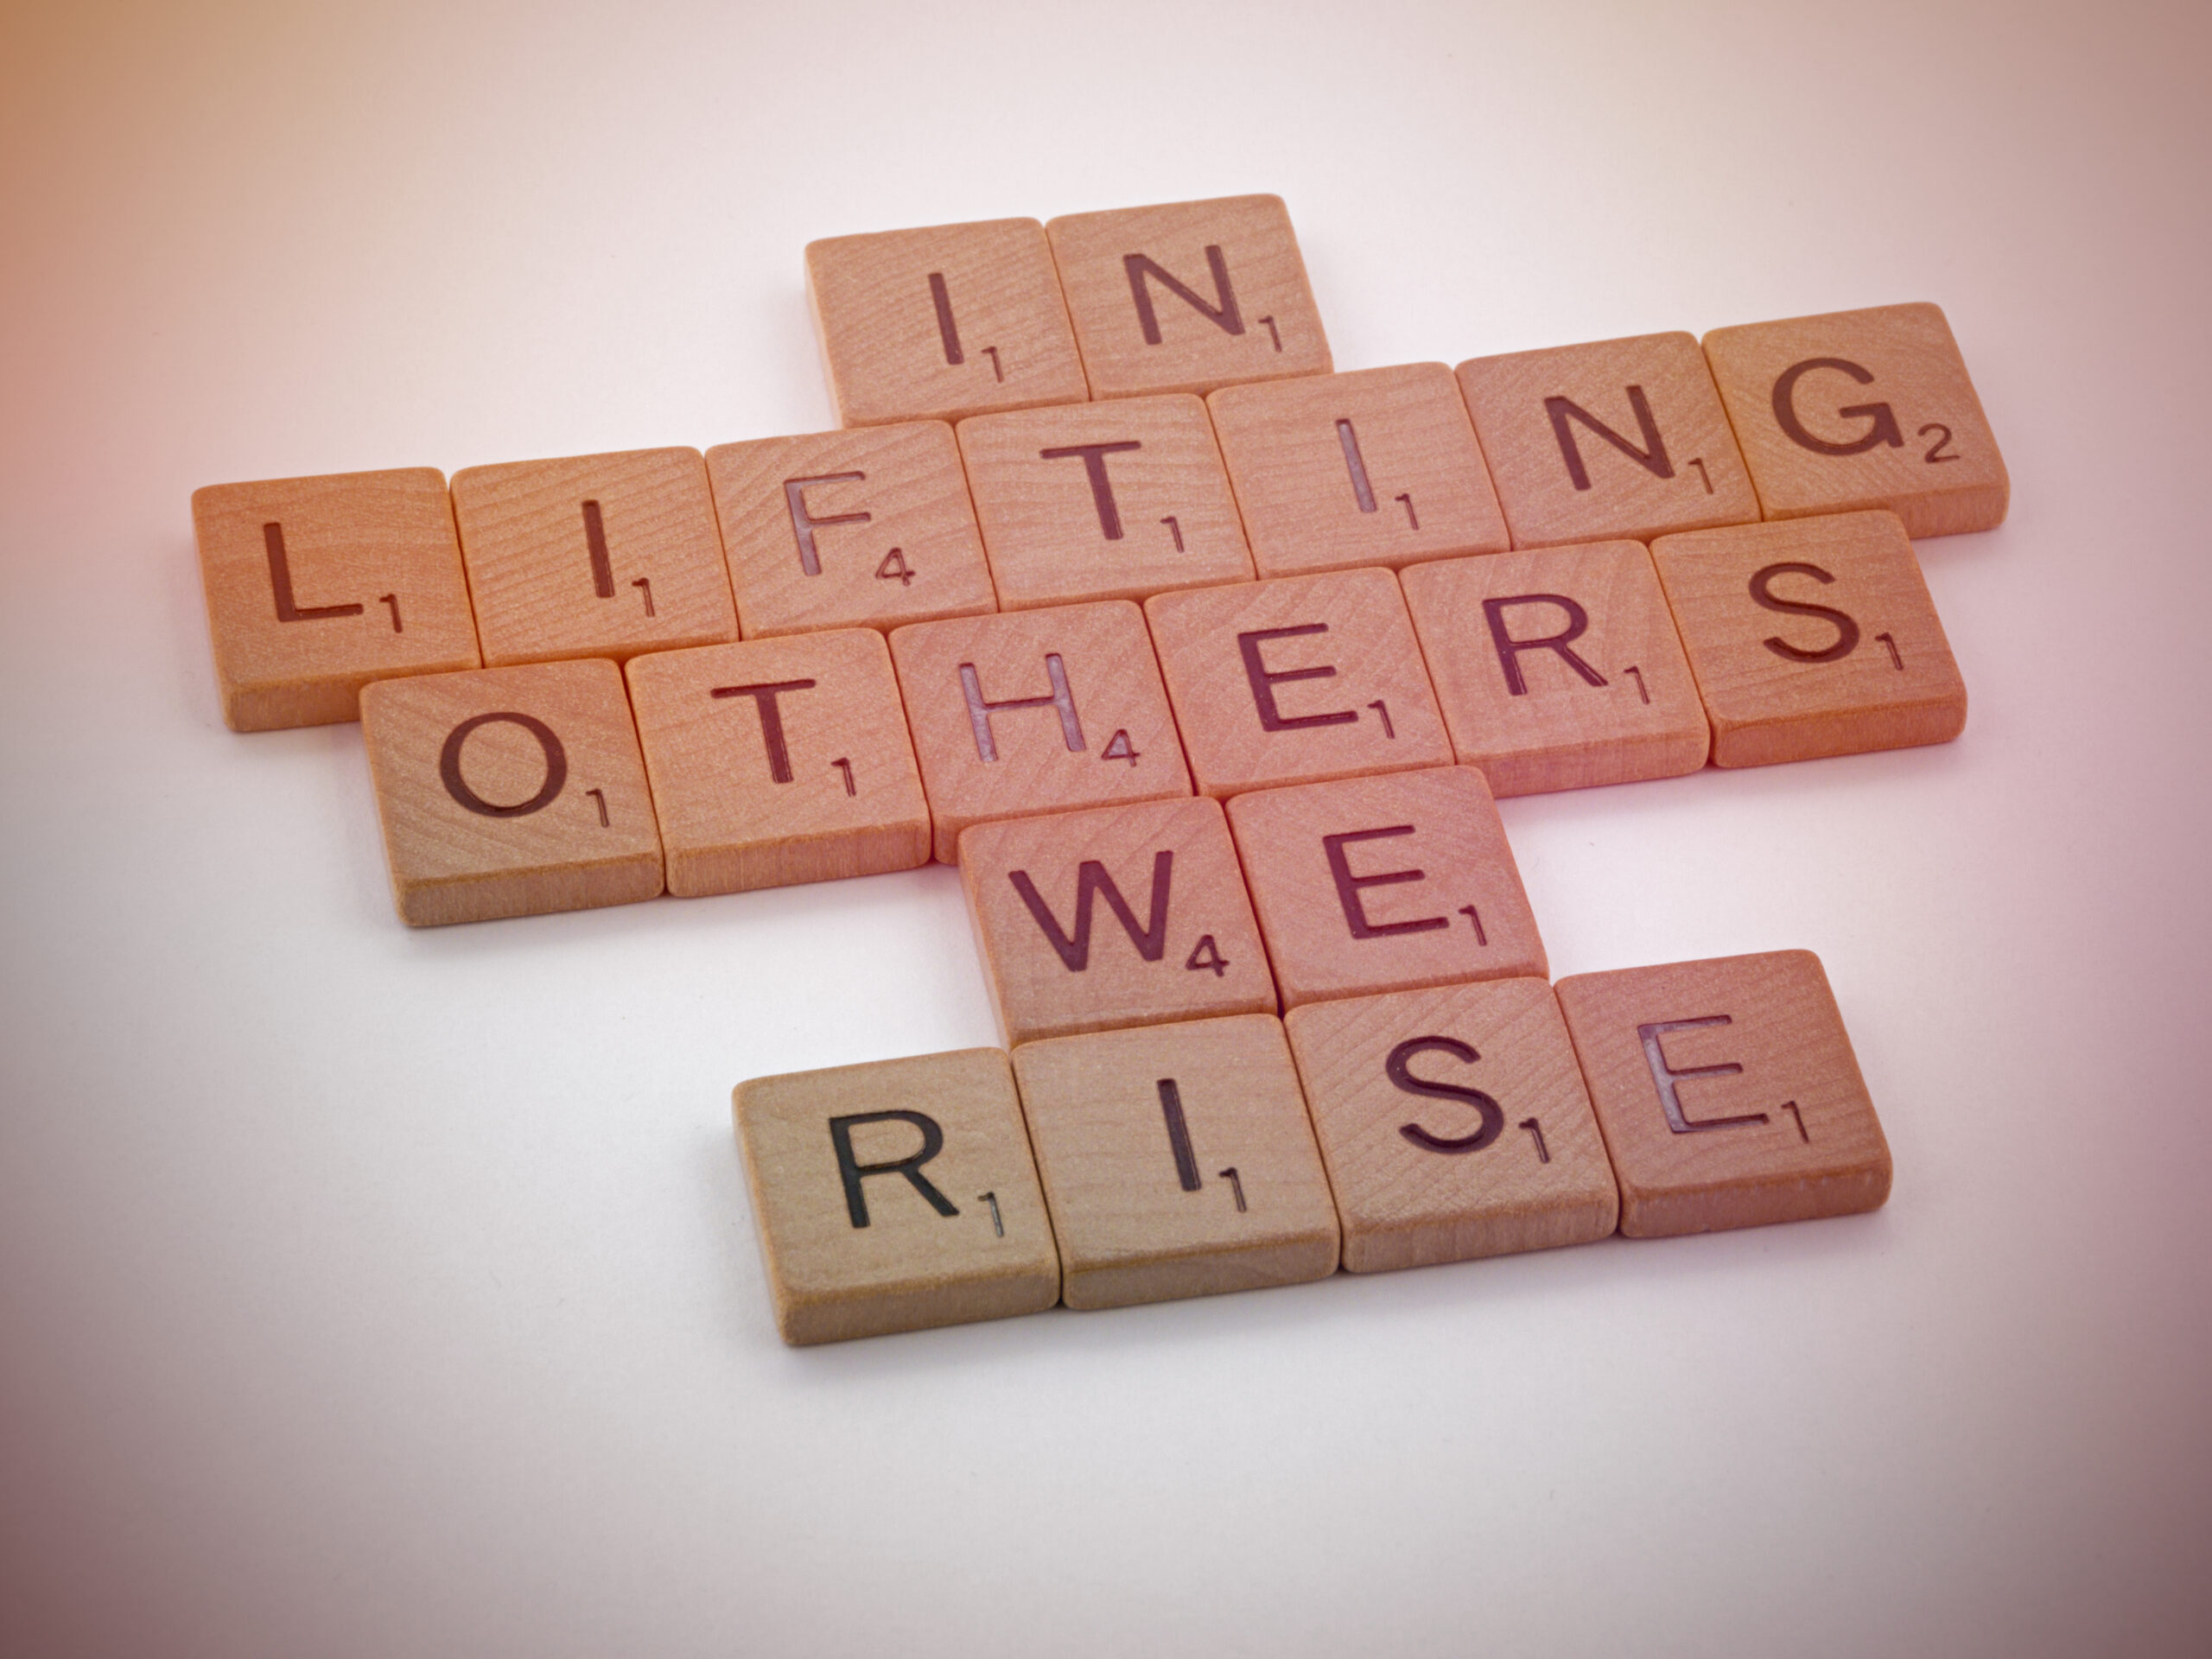 Lift Others